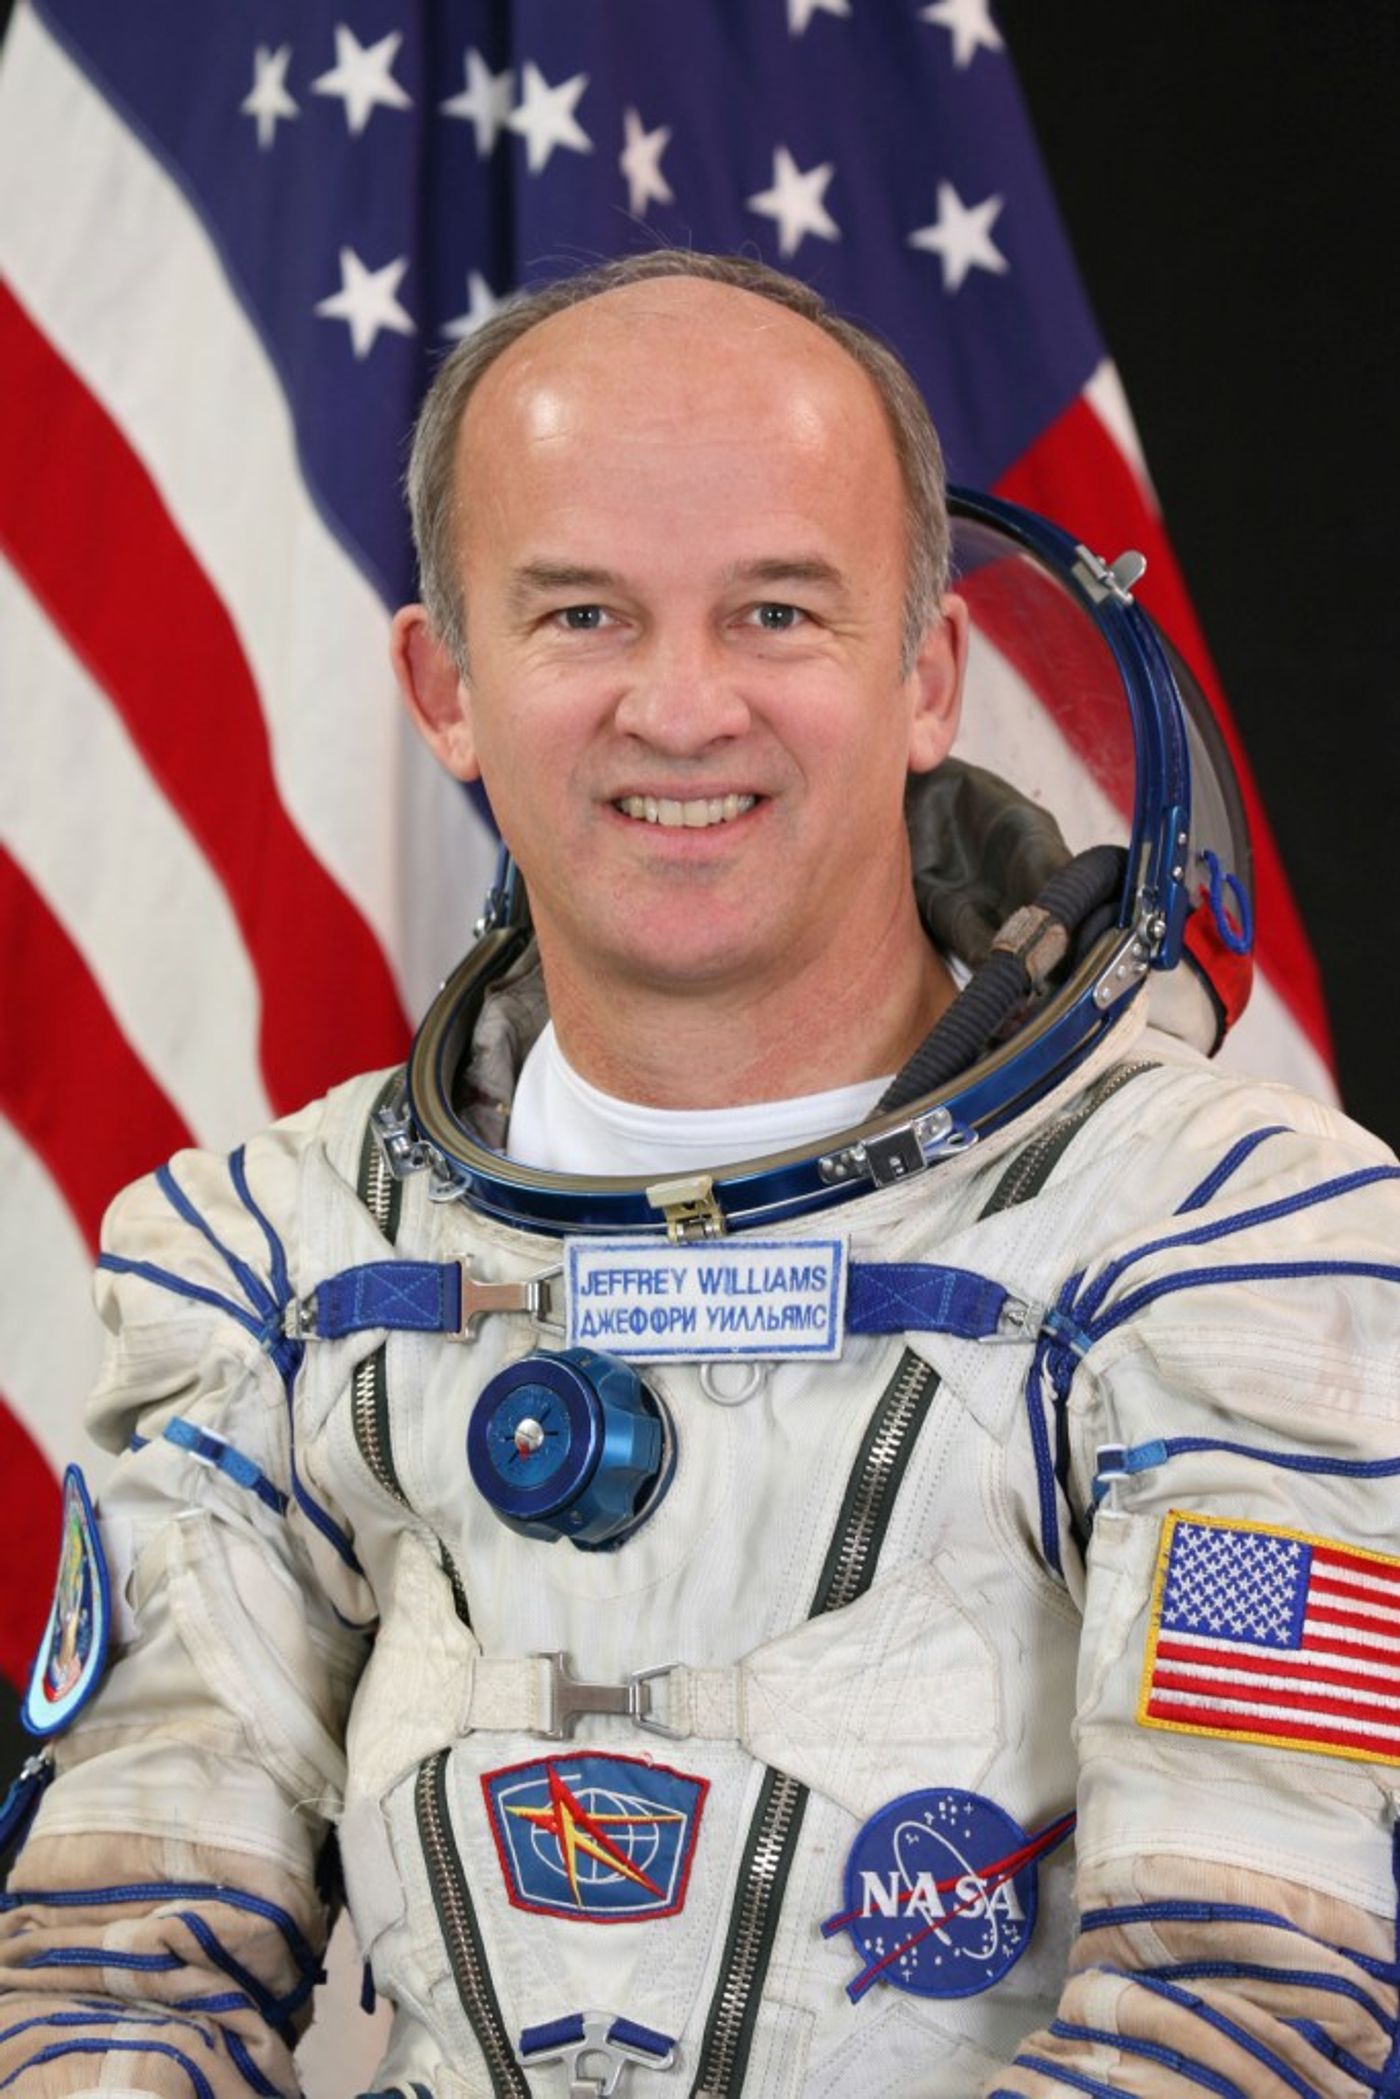 NASA's Jeff Williams will be returning to space and breaking Scott Kelly's record for total days in space for any U.S. astronaut.